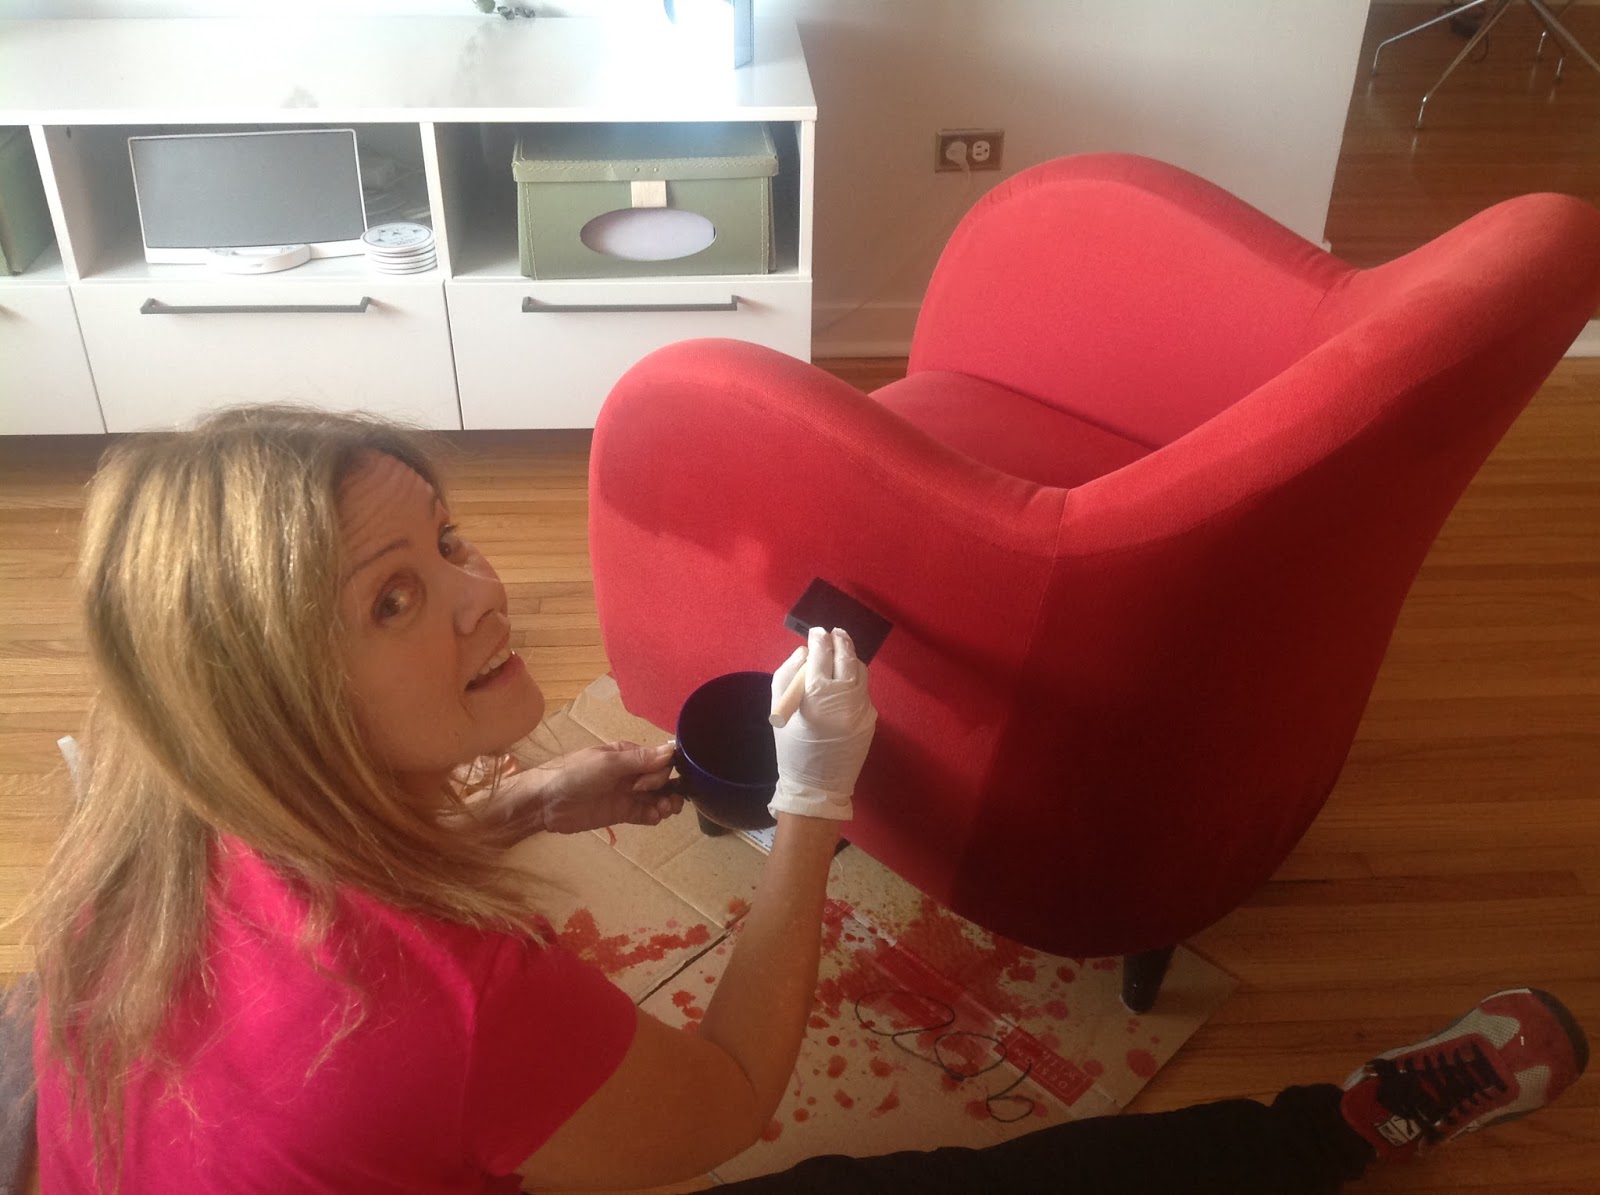 How To Dye an Upholstered Chair – Rit Dye